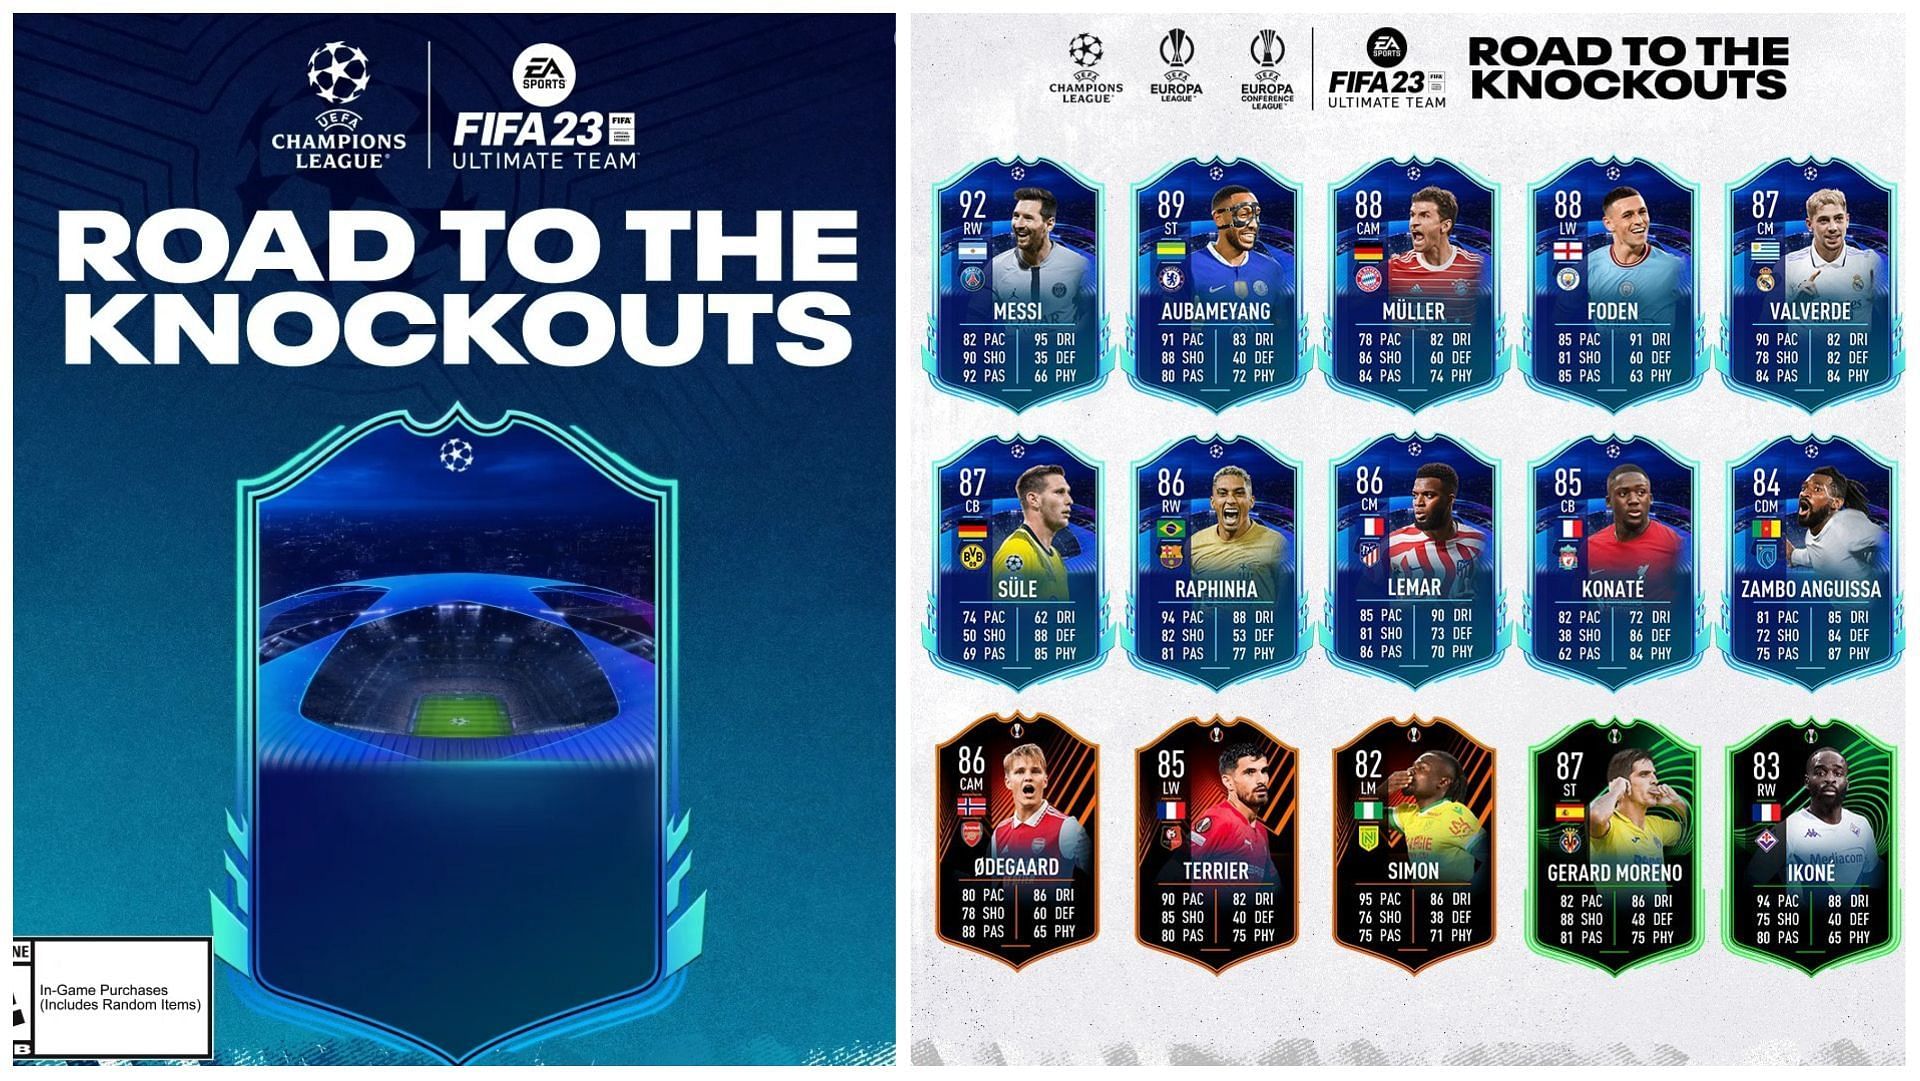 The Road to the Knockouts promo has been released in FIFA 23 (Images via EA Sports)